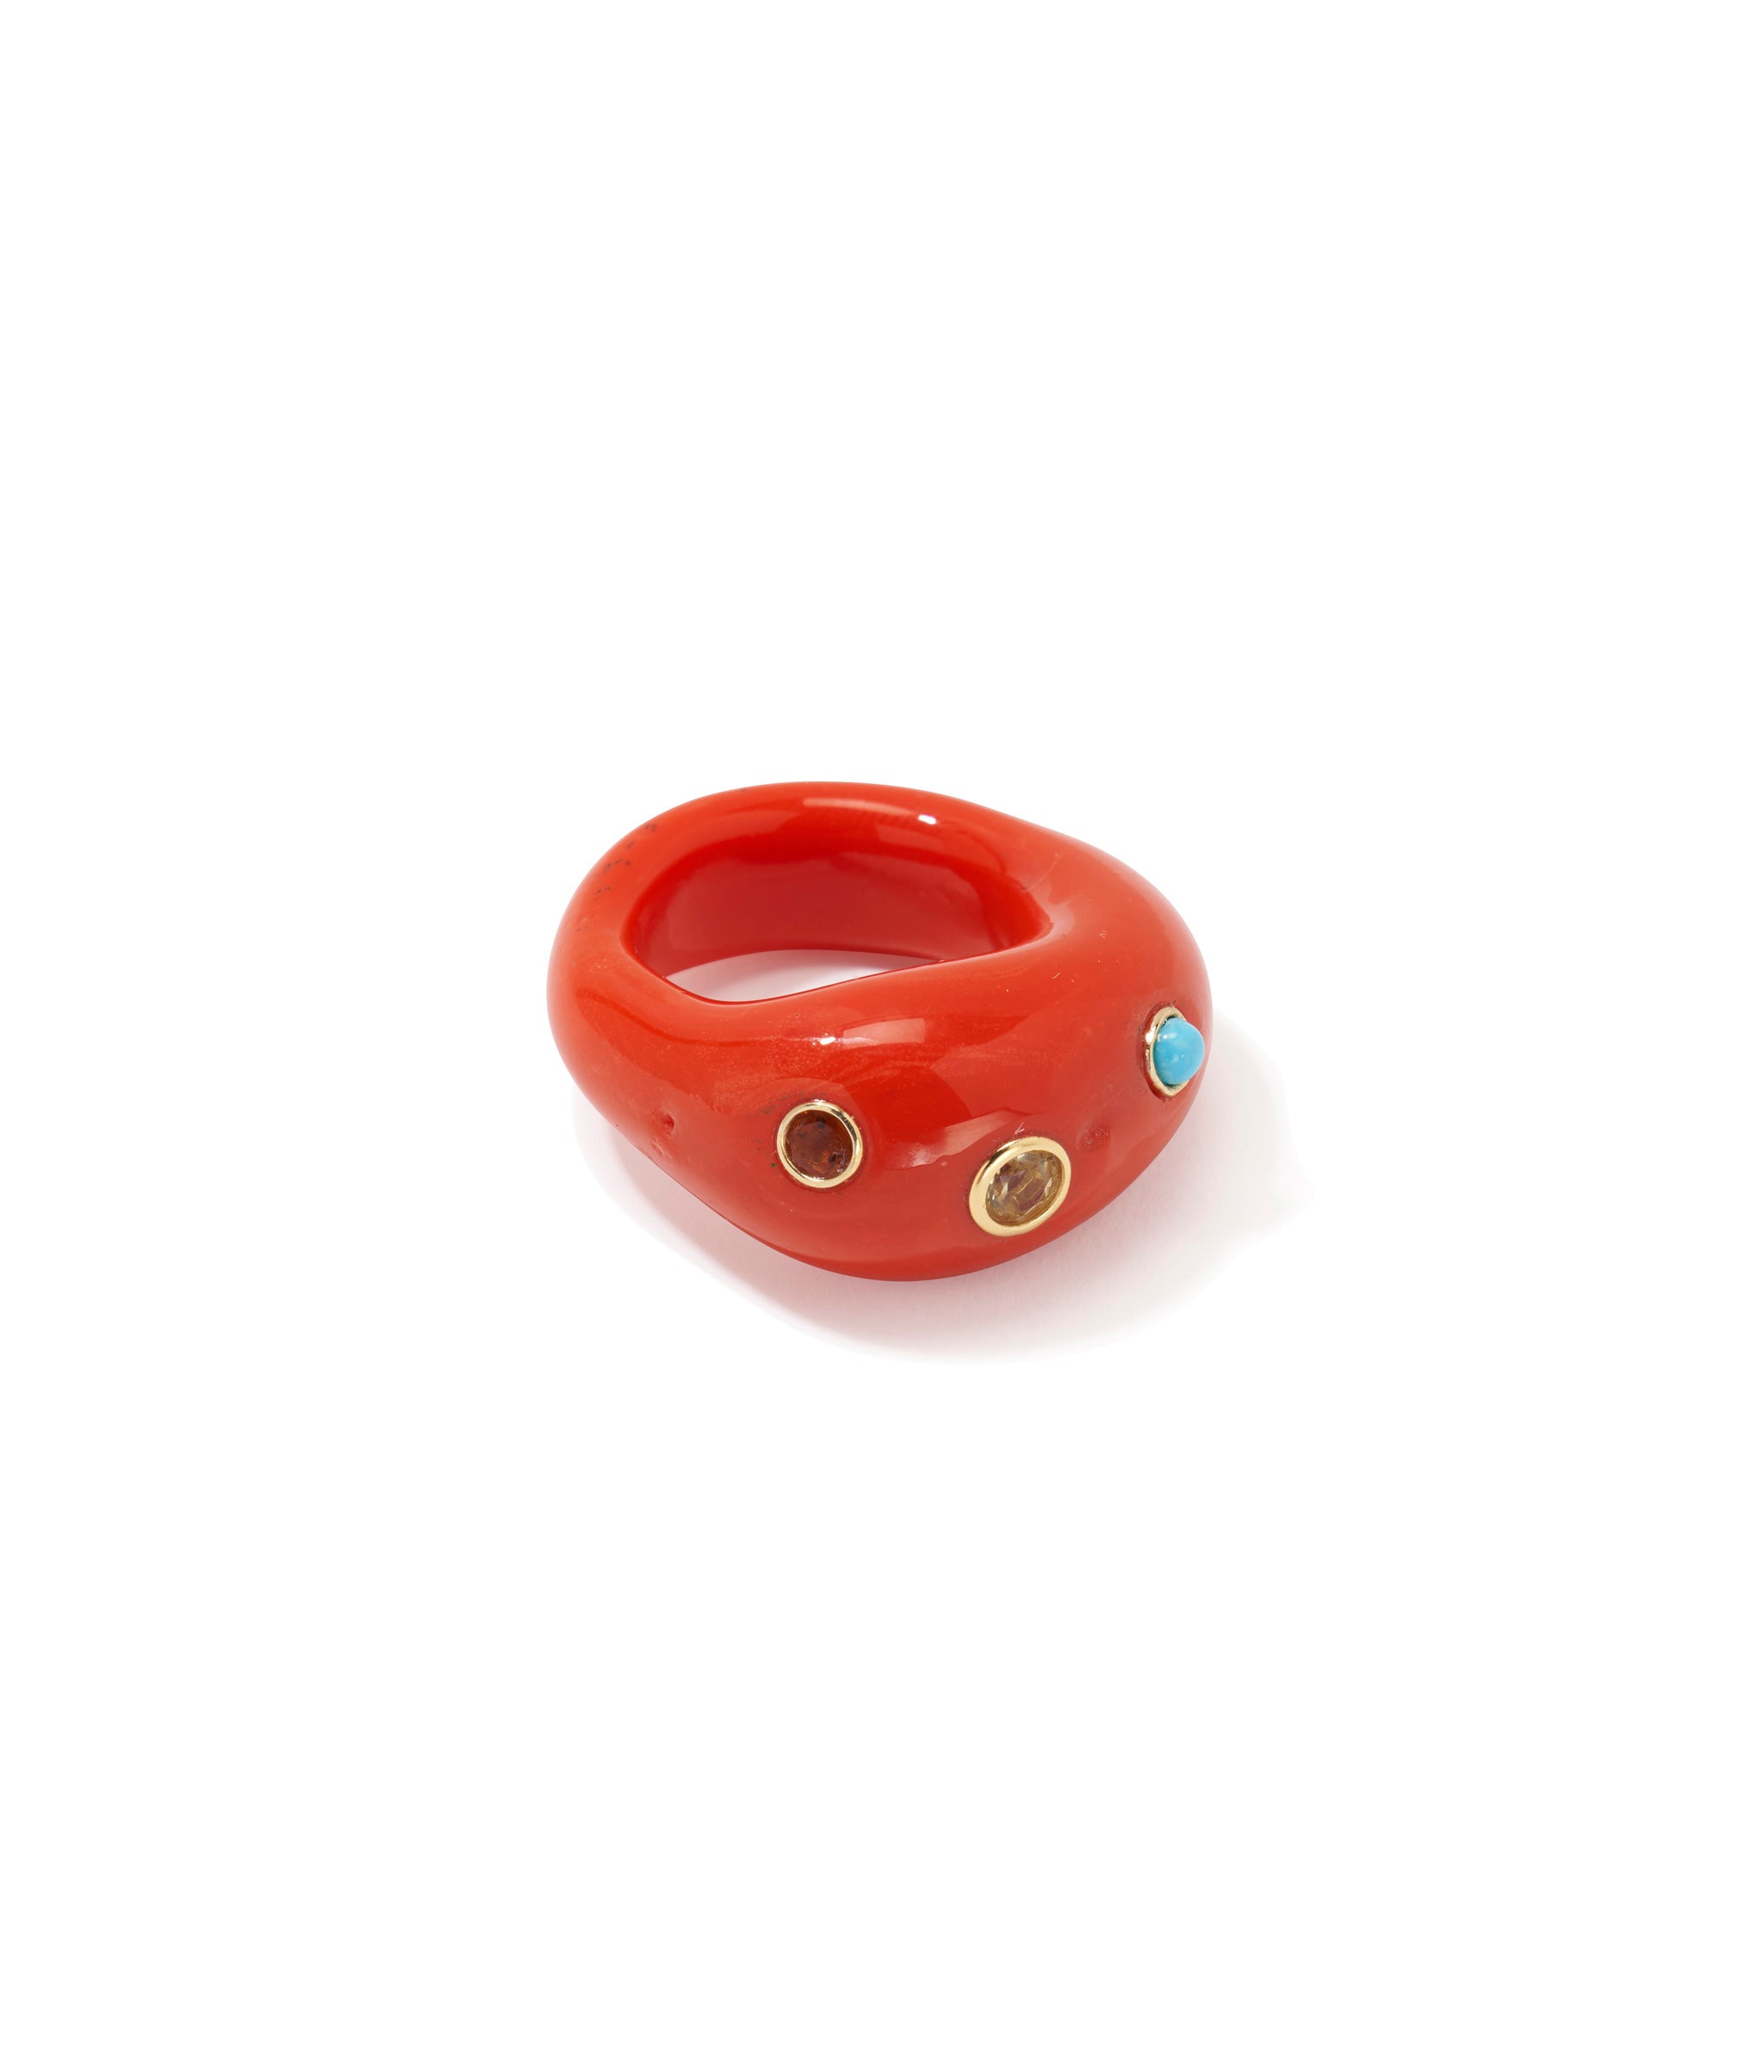 Monument Ring in Red Hot. Red domed glass set with faceted citrine, lemon quartz, and turquoise cabochons.